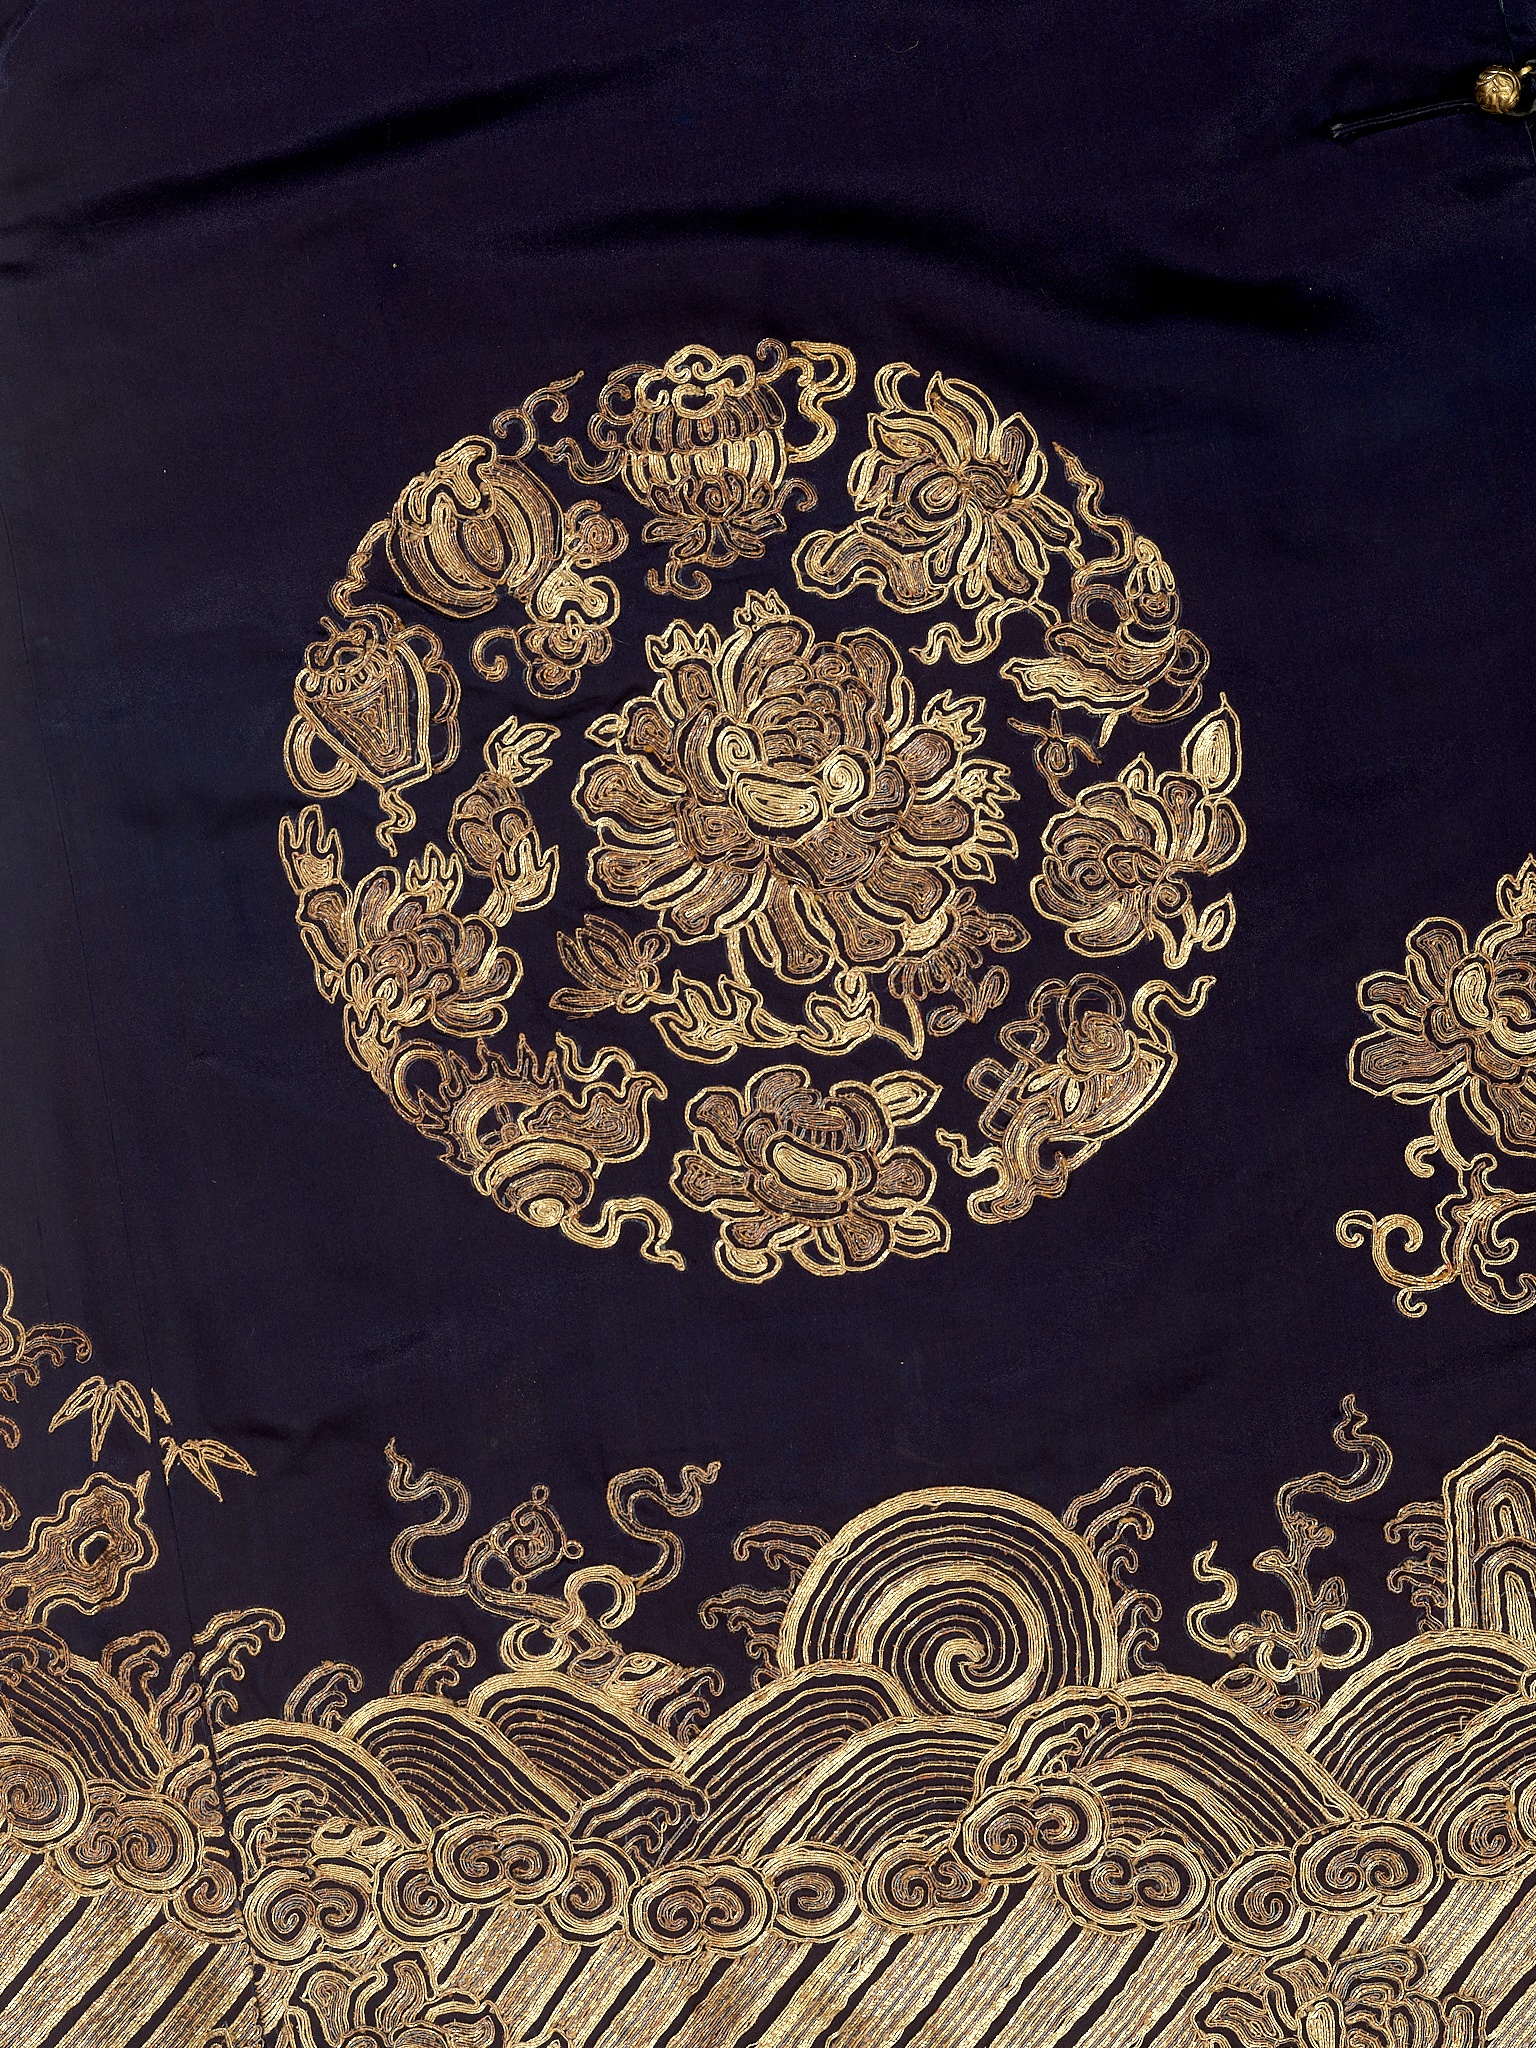 A WOMAN'S SILVER AND GOLD-EMBROIDERED SILK ROUNDEL ROBE, 19TH CENTURY - Image 8 of 14